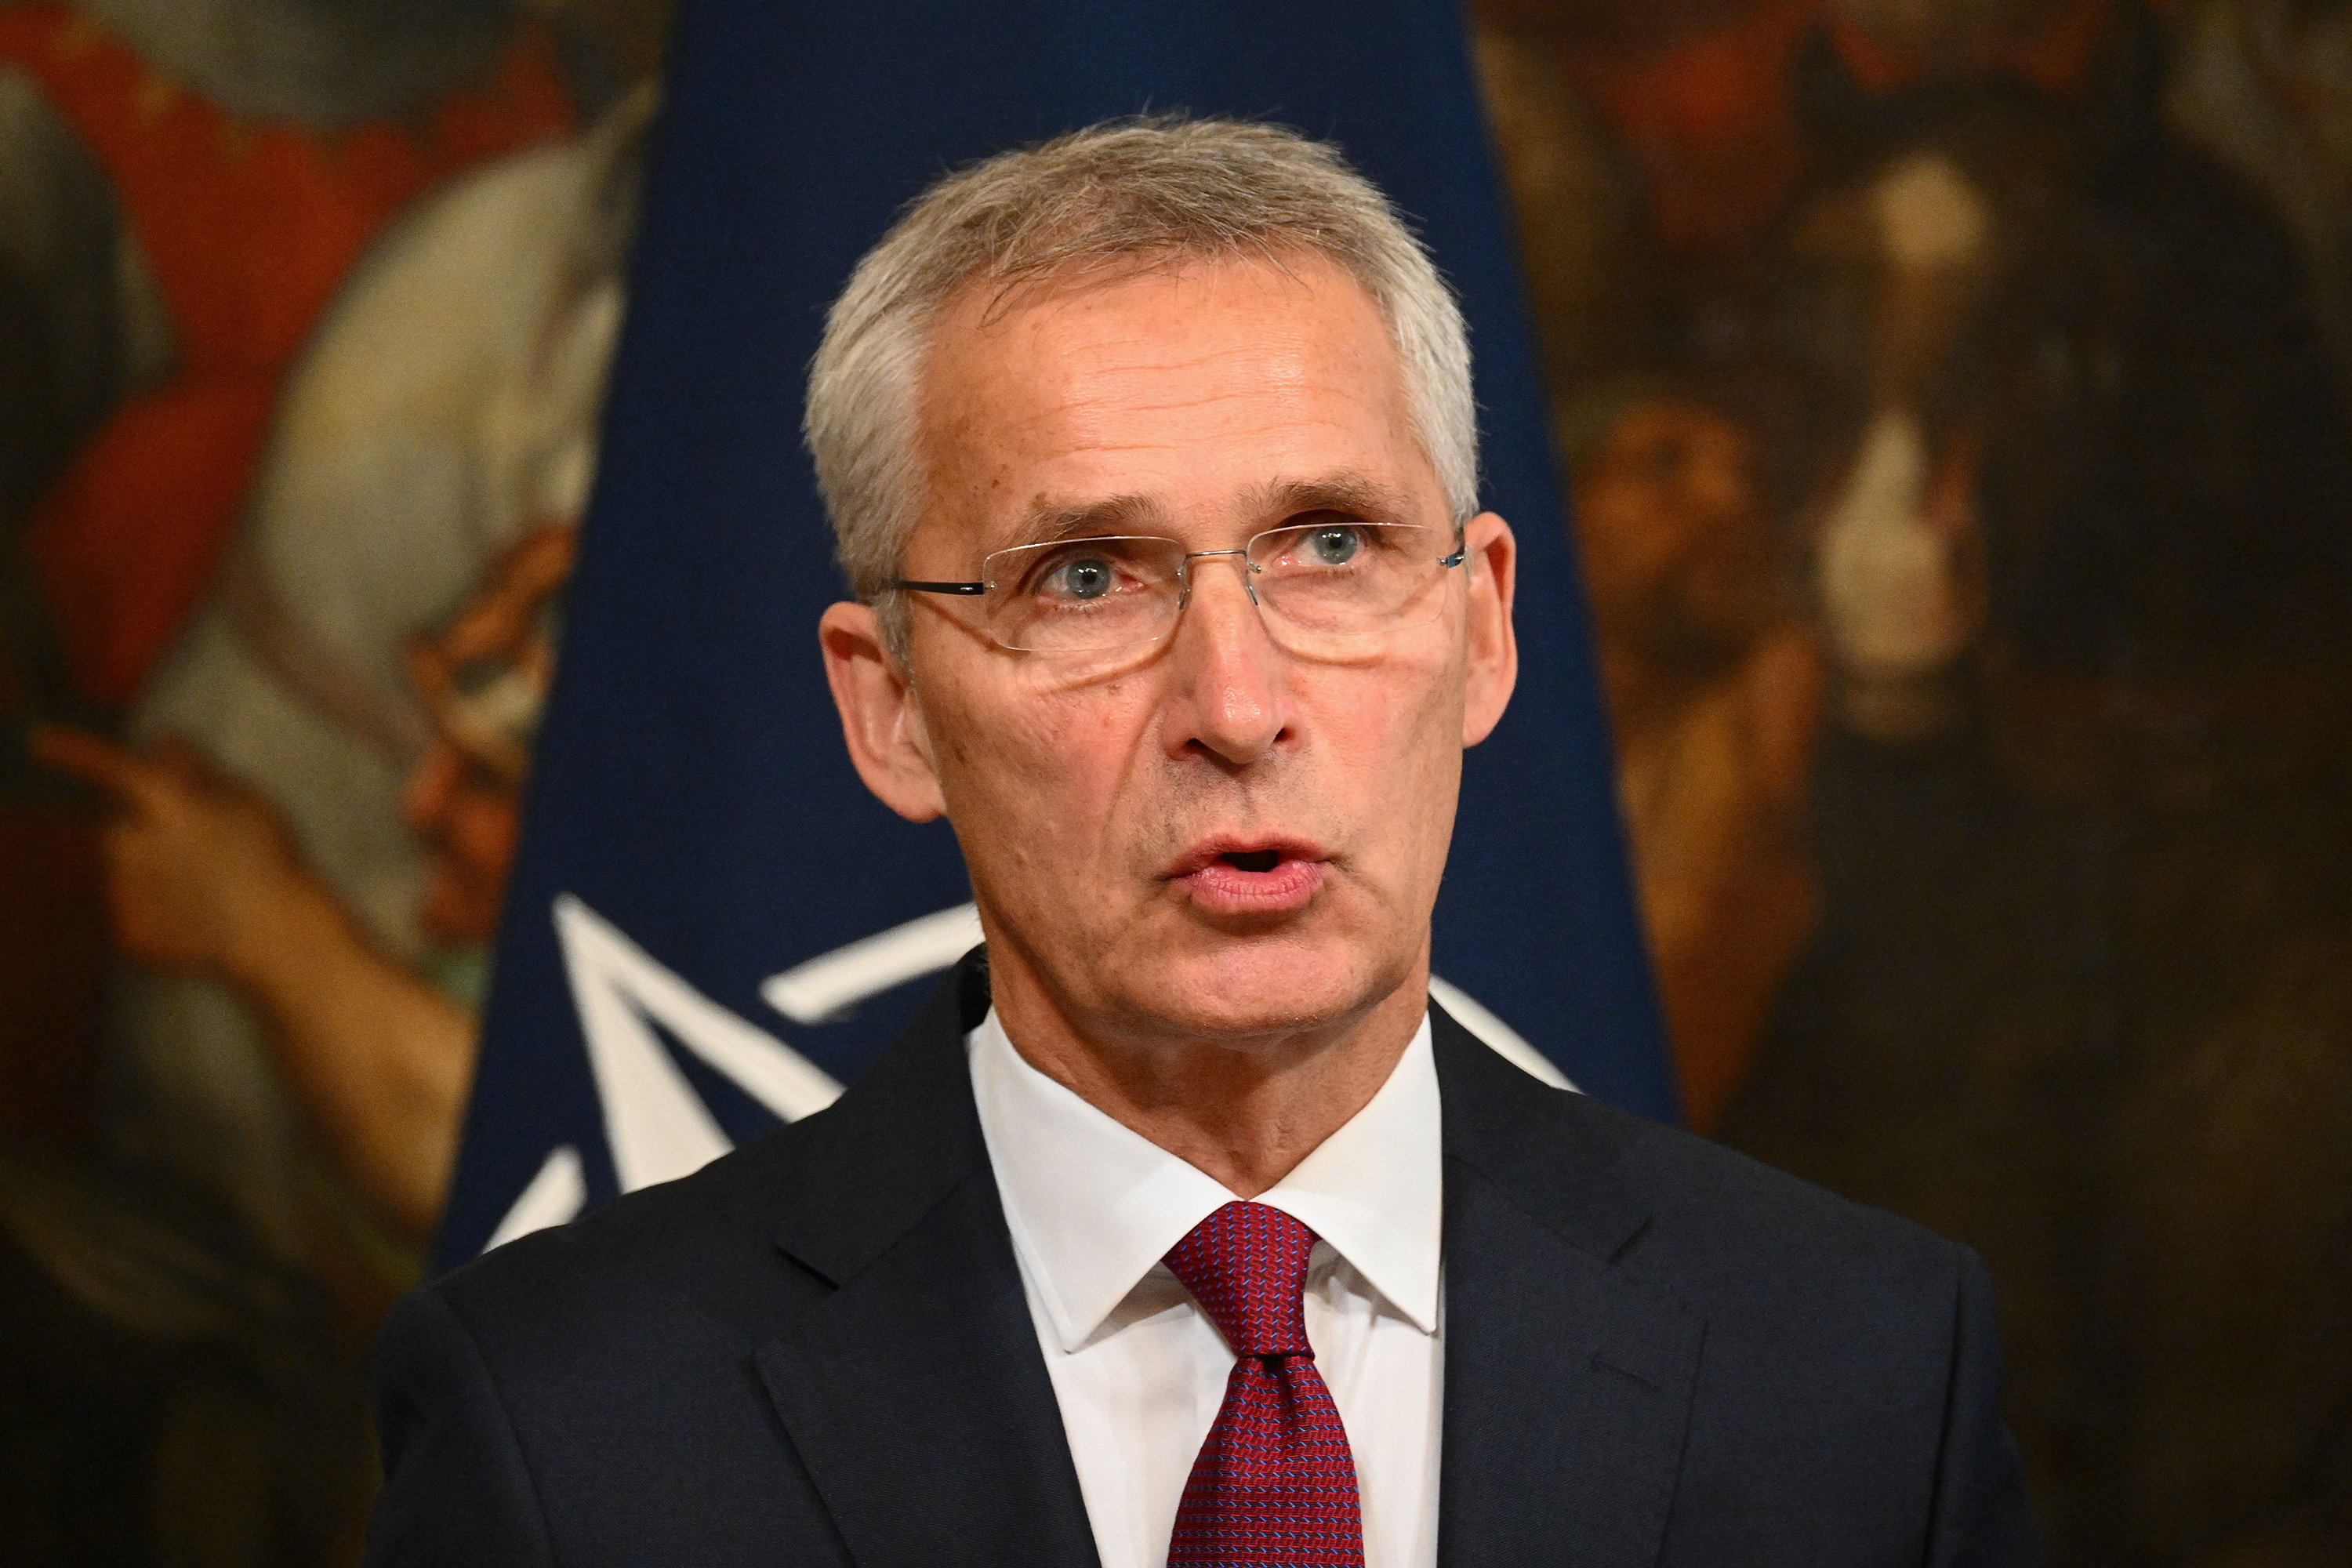 NATO Secretary General Jens Stoltenberg speaks at a press conference on November 10, in Rome, Italy.